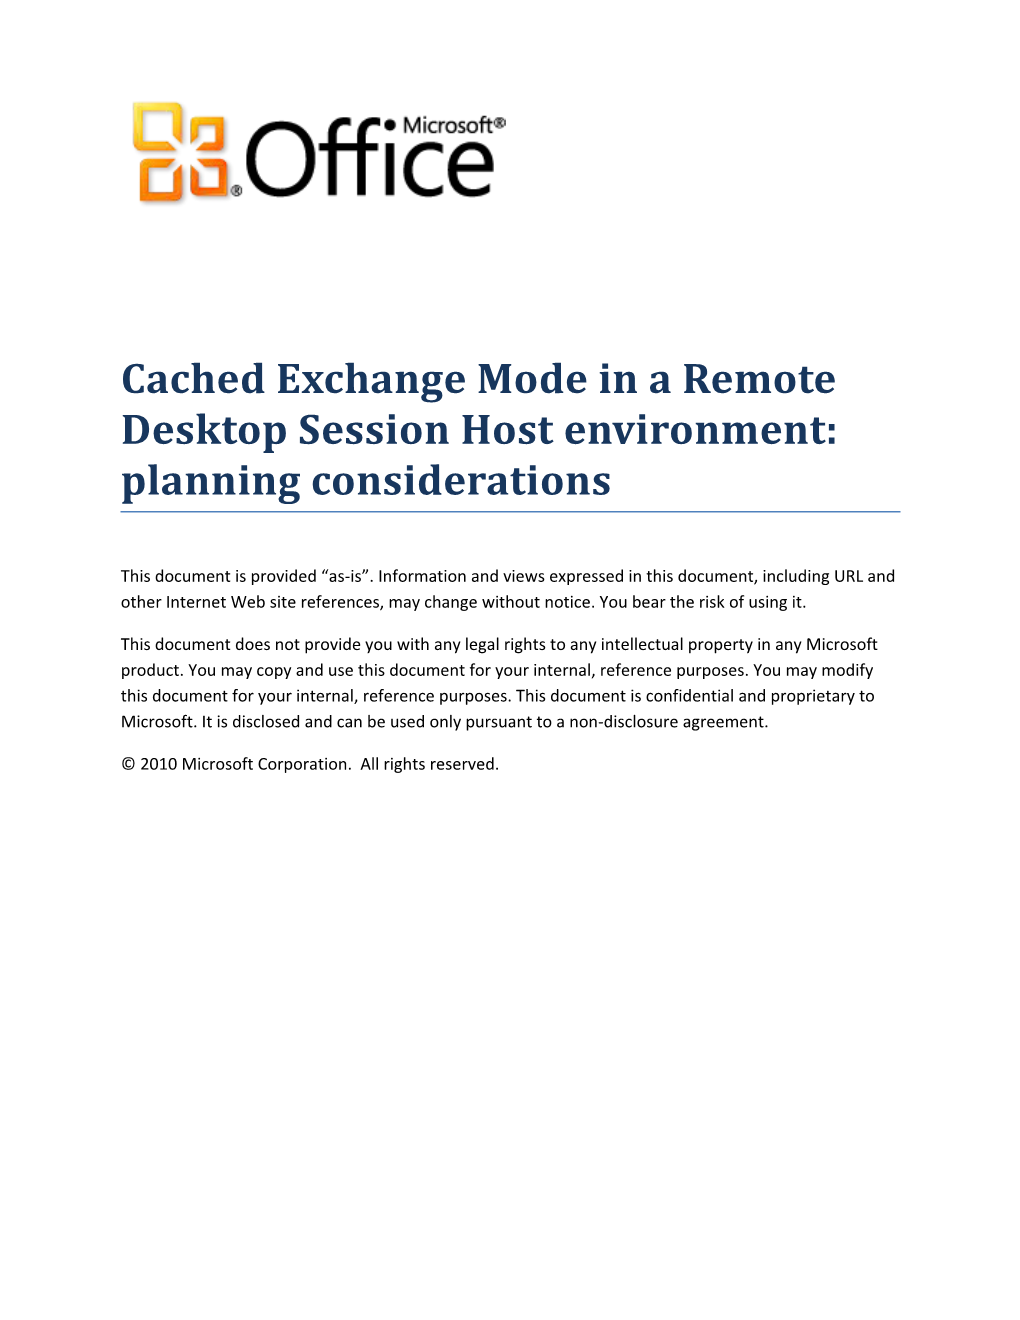 Cached Exchange Mode in a Remote Desktop Server Environmentaugust 2010